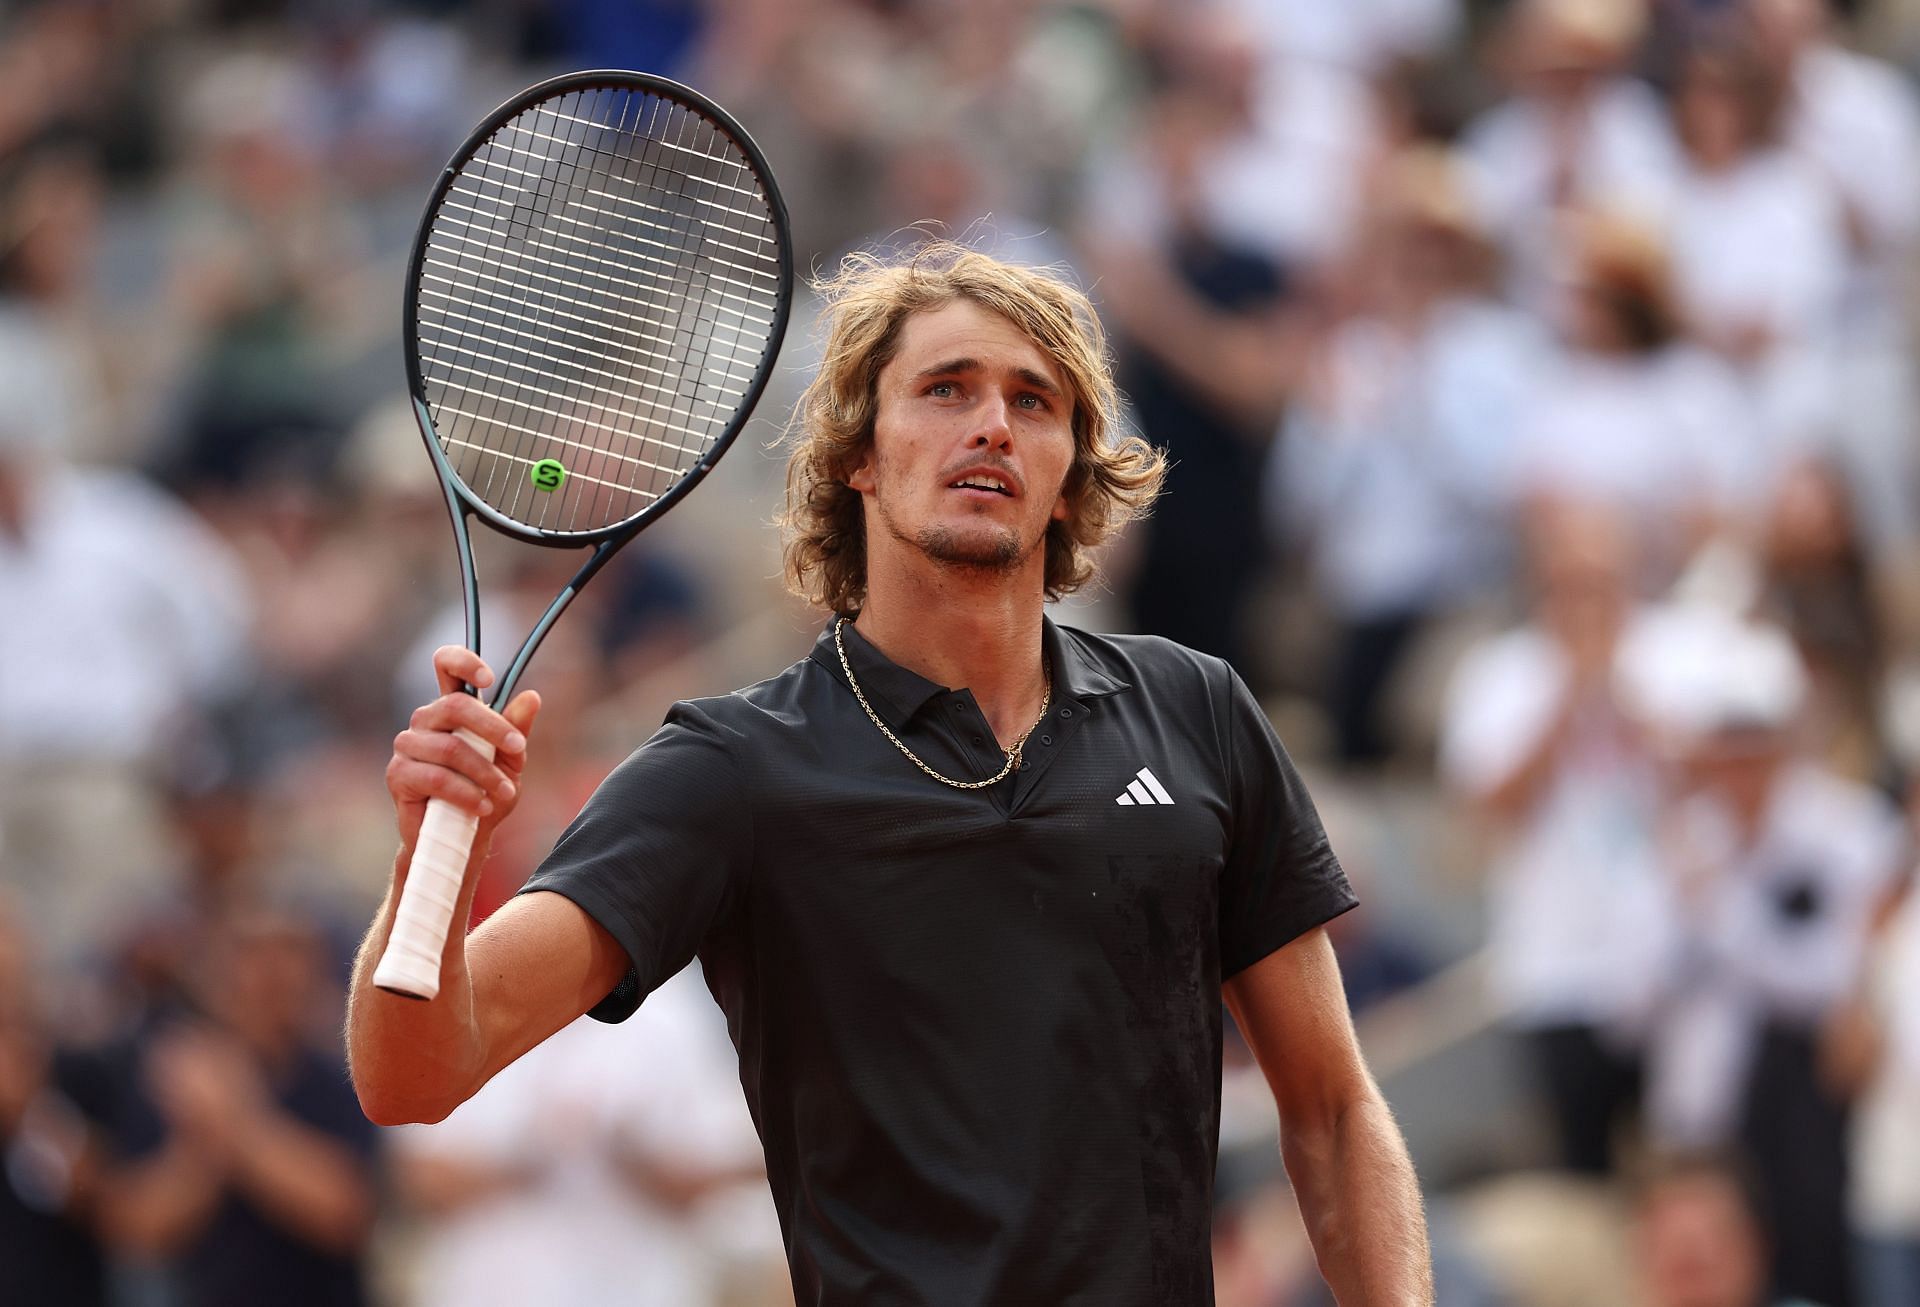 Alexander Zverev in action at the French Open